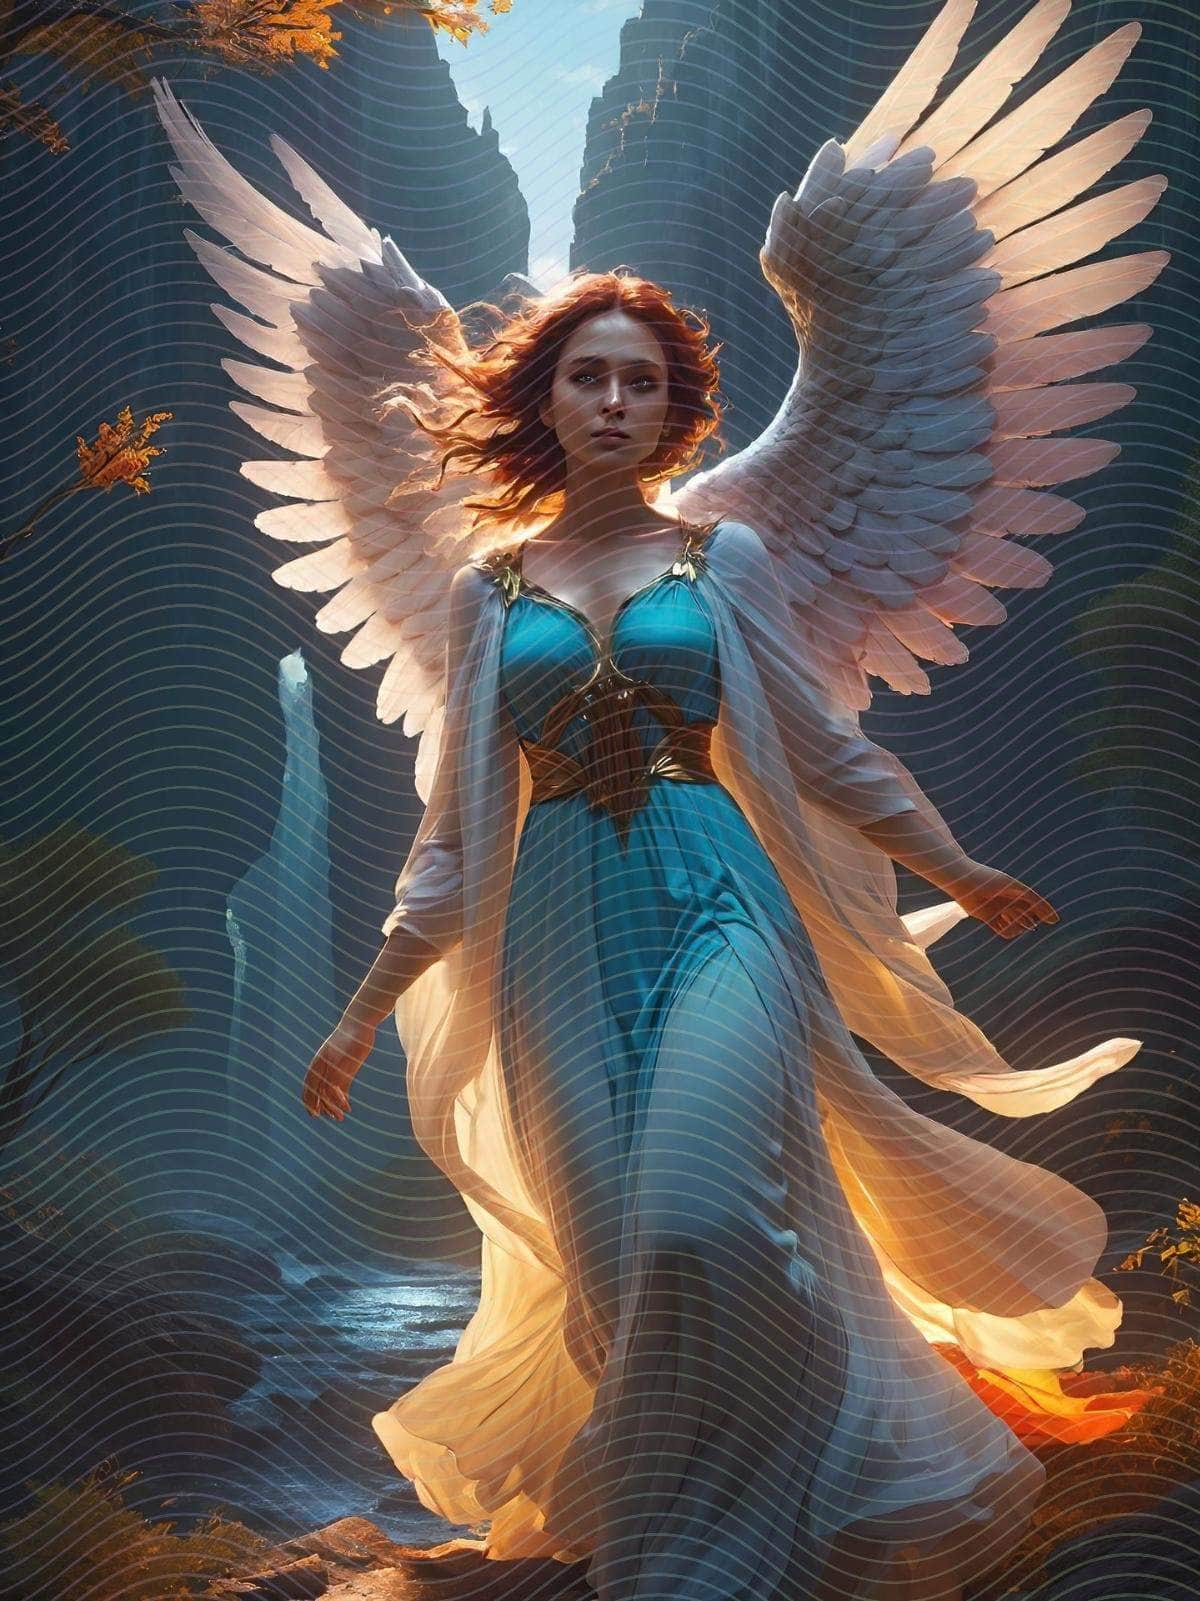 A Ethereal Angel Woman with Vibrant Wings